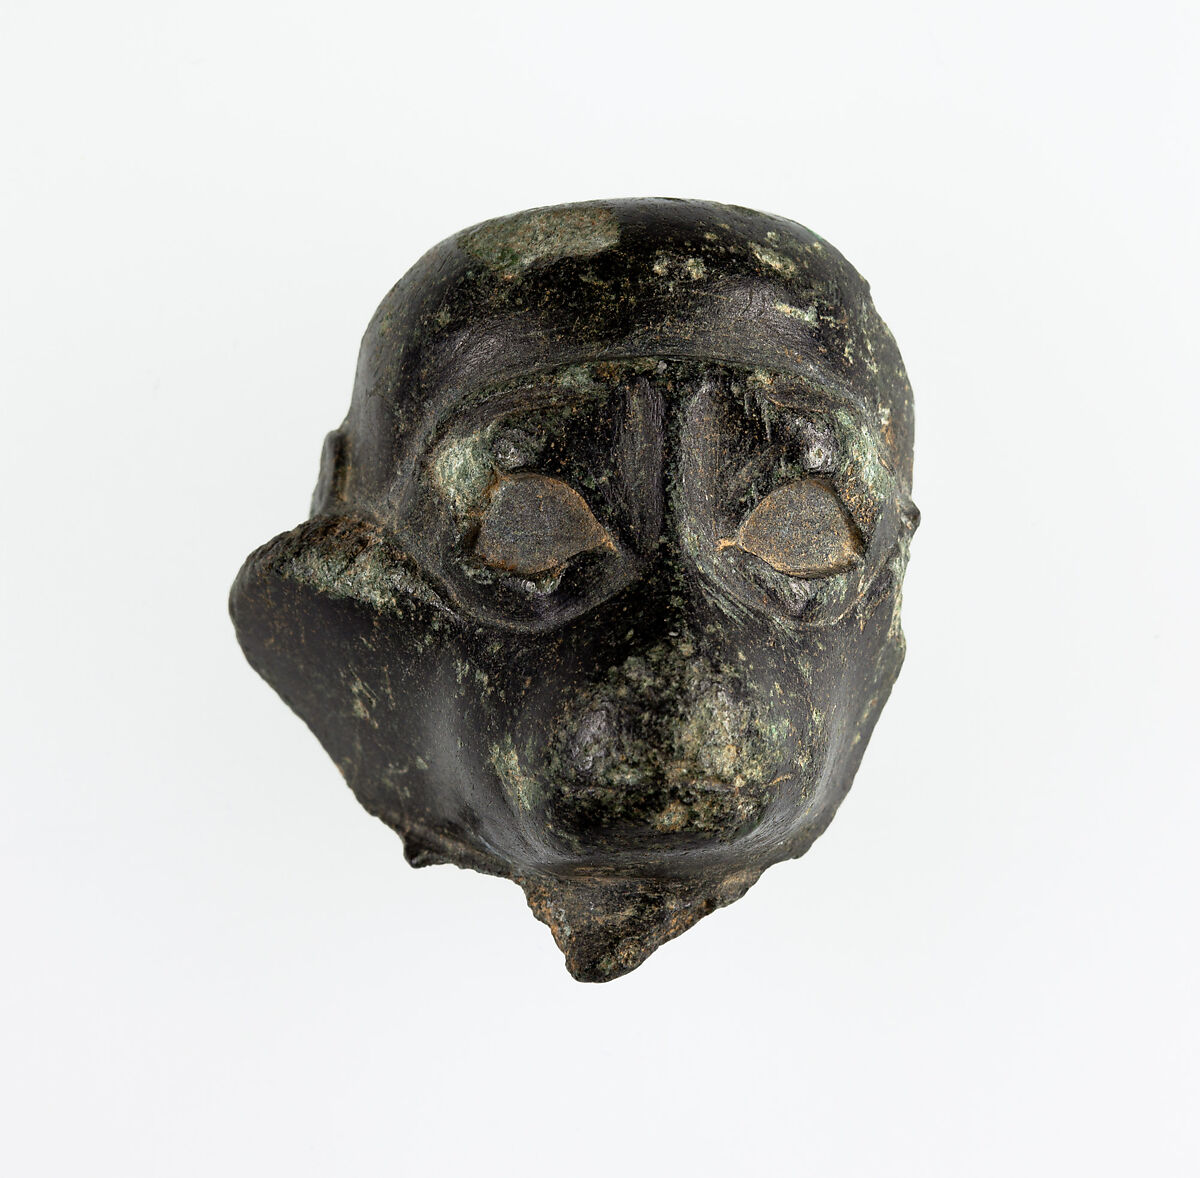 Head of a monkey from an ointment vessel, Serpentinite 